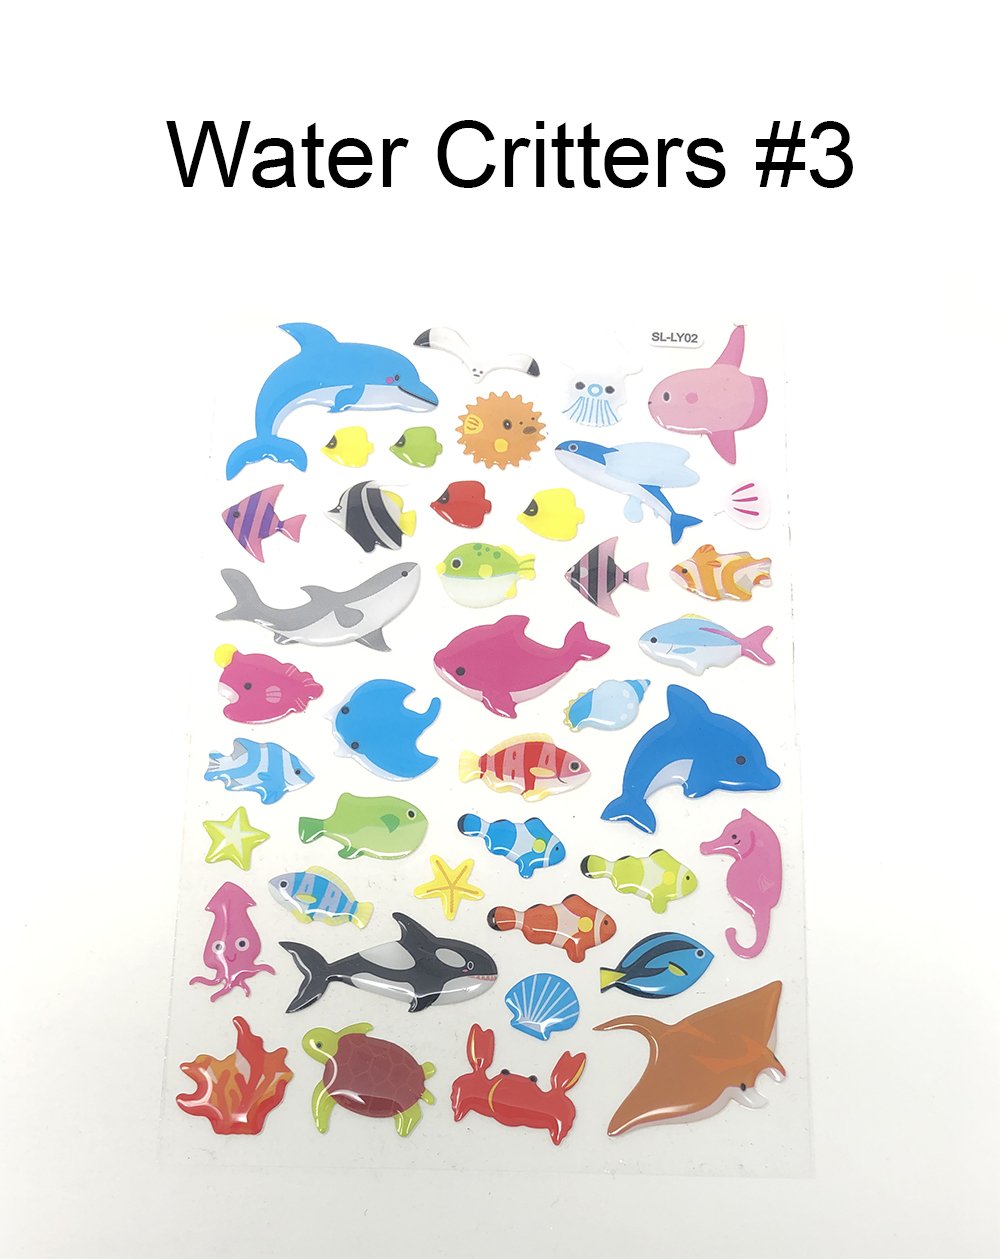 Water Critters